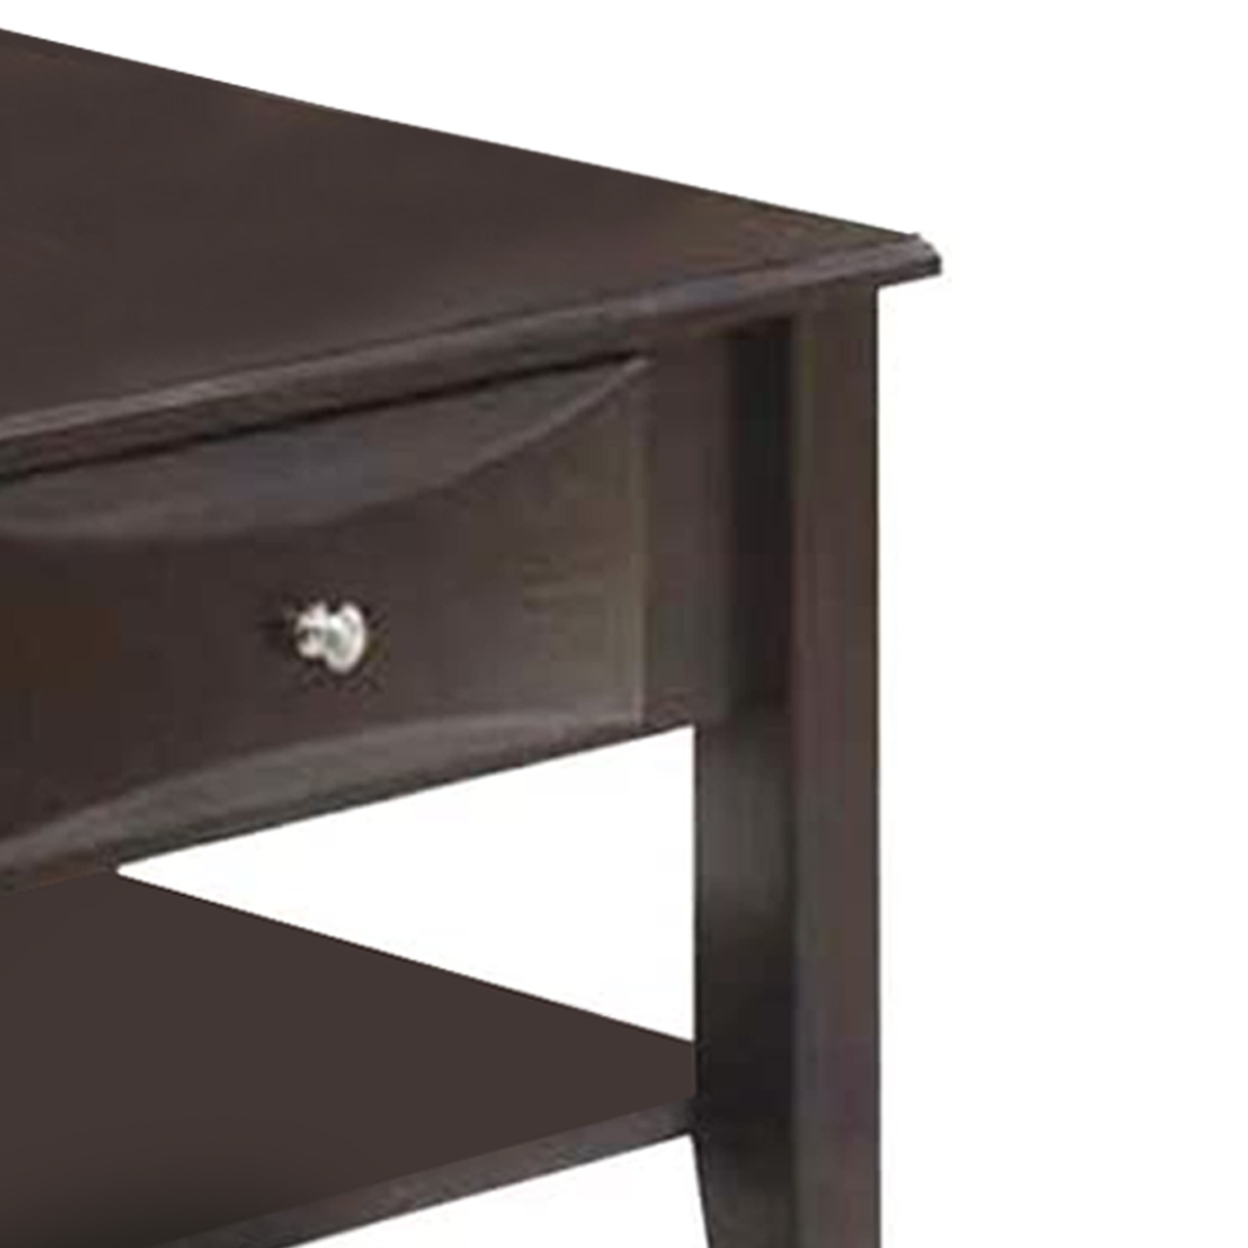 24 Inch Classic Square End Table, Single Drawer, Bottom Shelf, Brown Wood